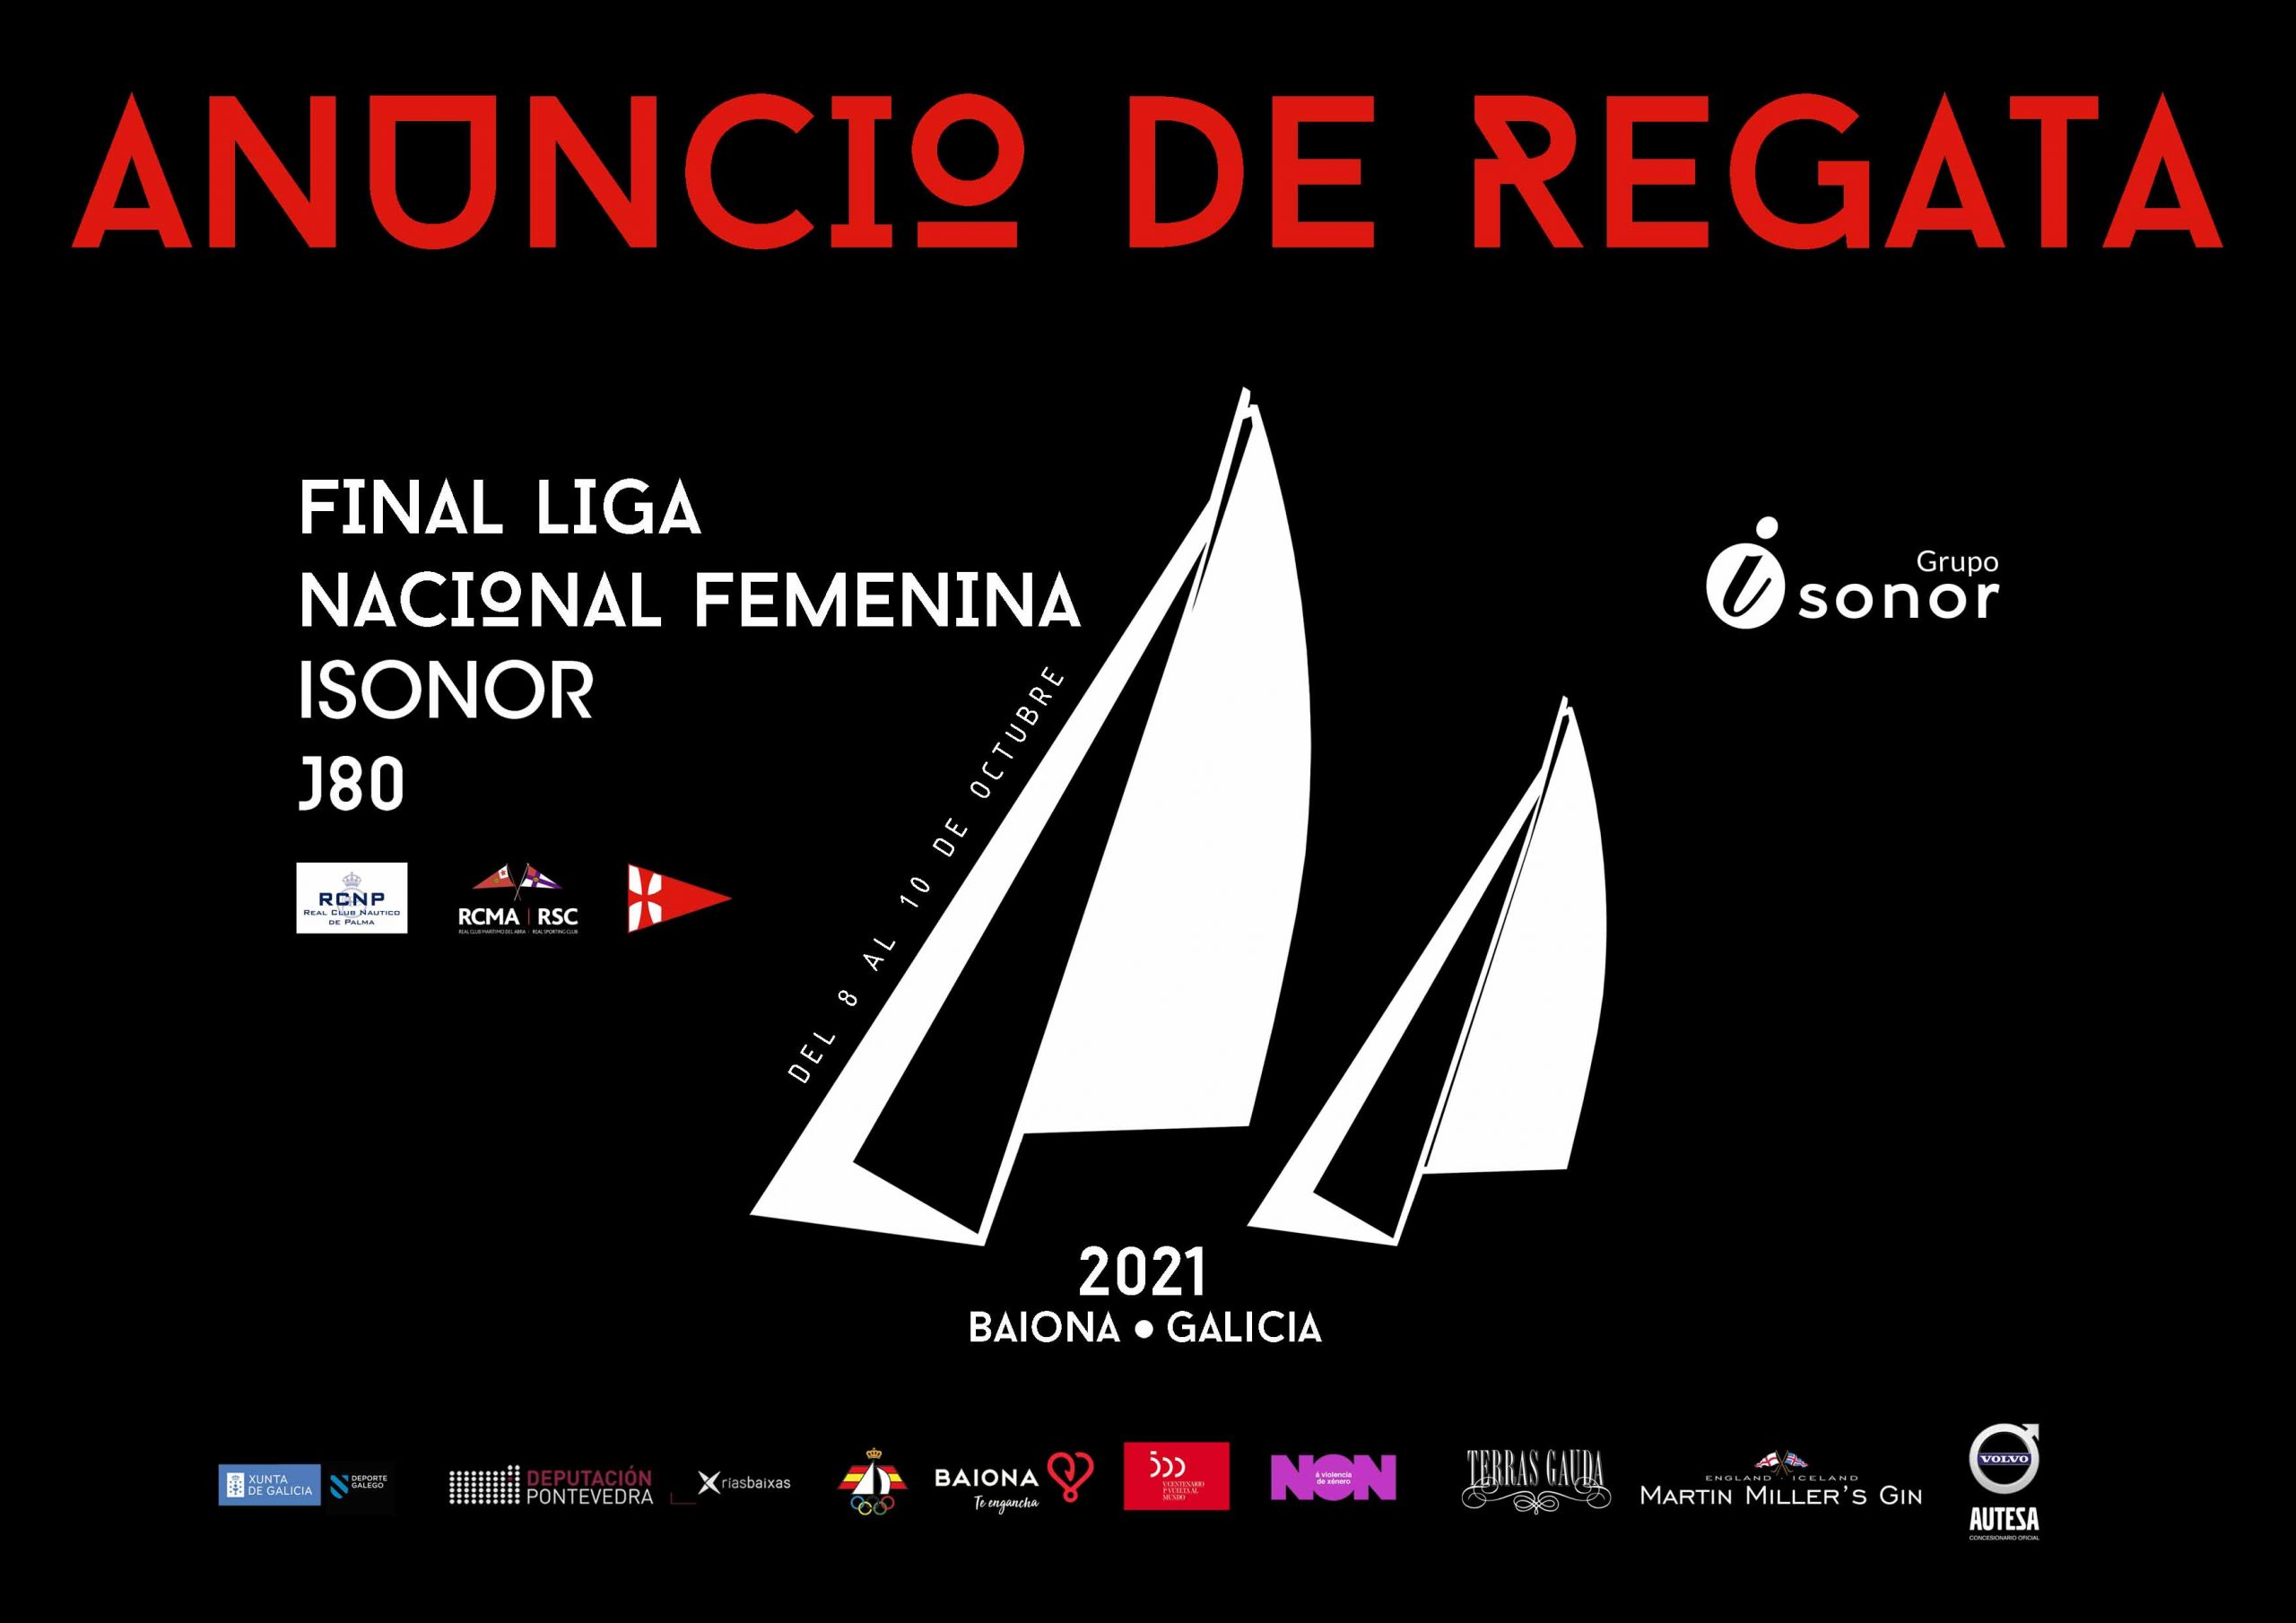 ANNOUNCEMENT OF THE FINAL RACE OF THE ISONOR J80 WOMEN'S NATIONAL LEAGUE